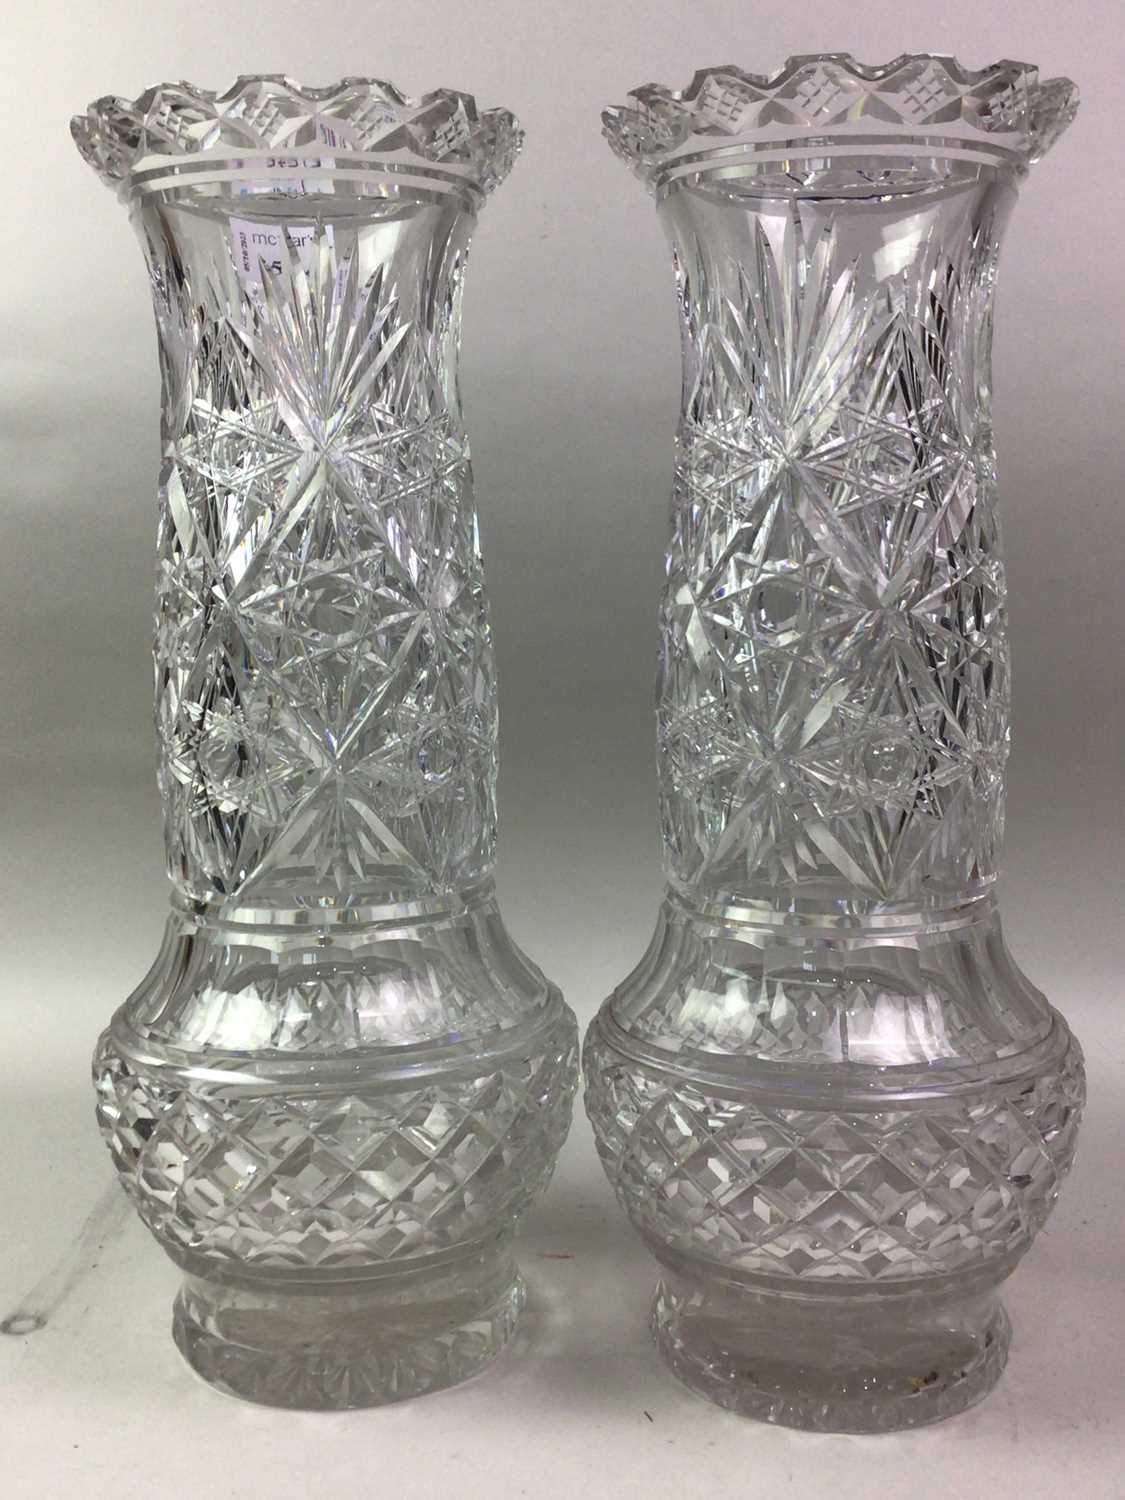 PAIR OF CRYSTAL VASES, ALONG WITH OTHER GLASSWARE - Image 2 of 3